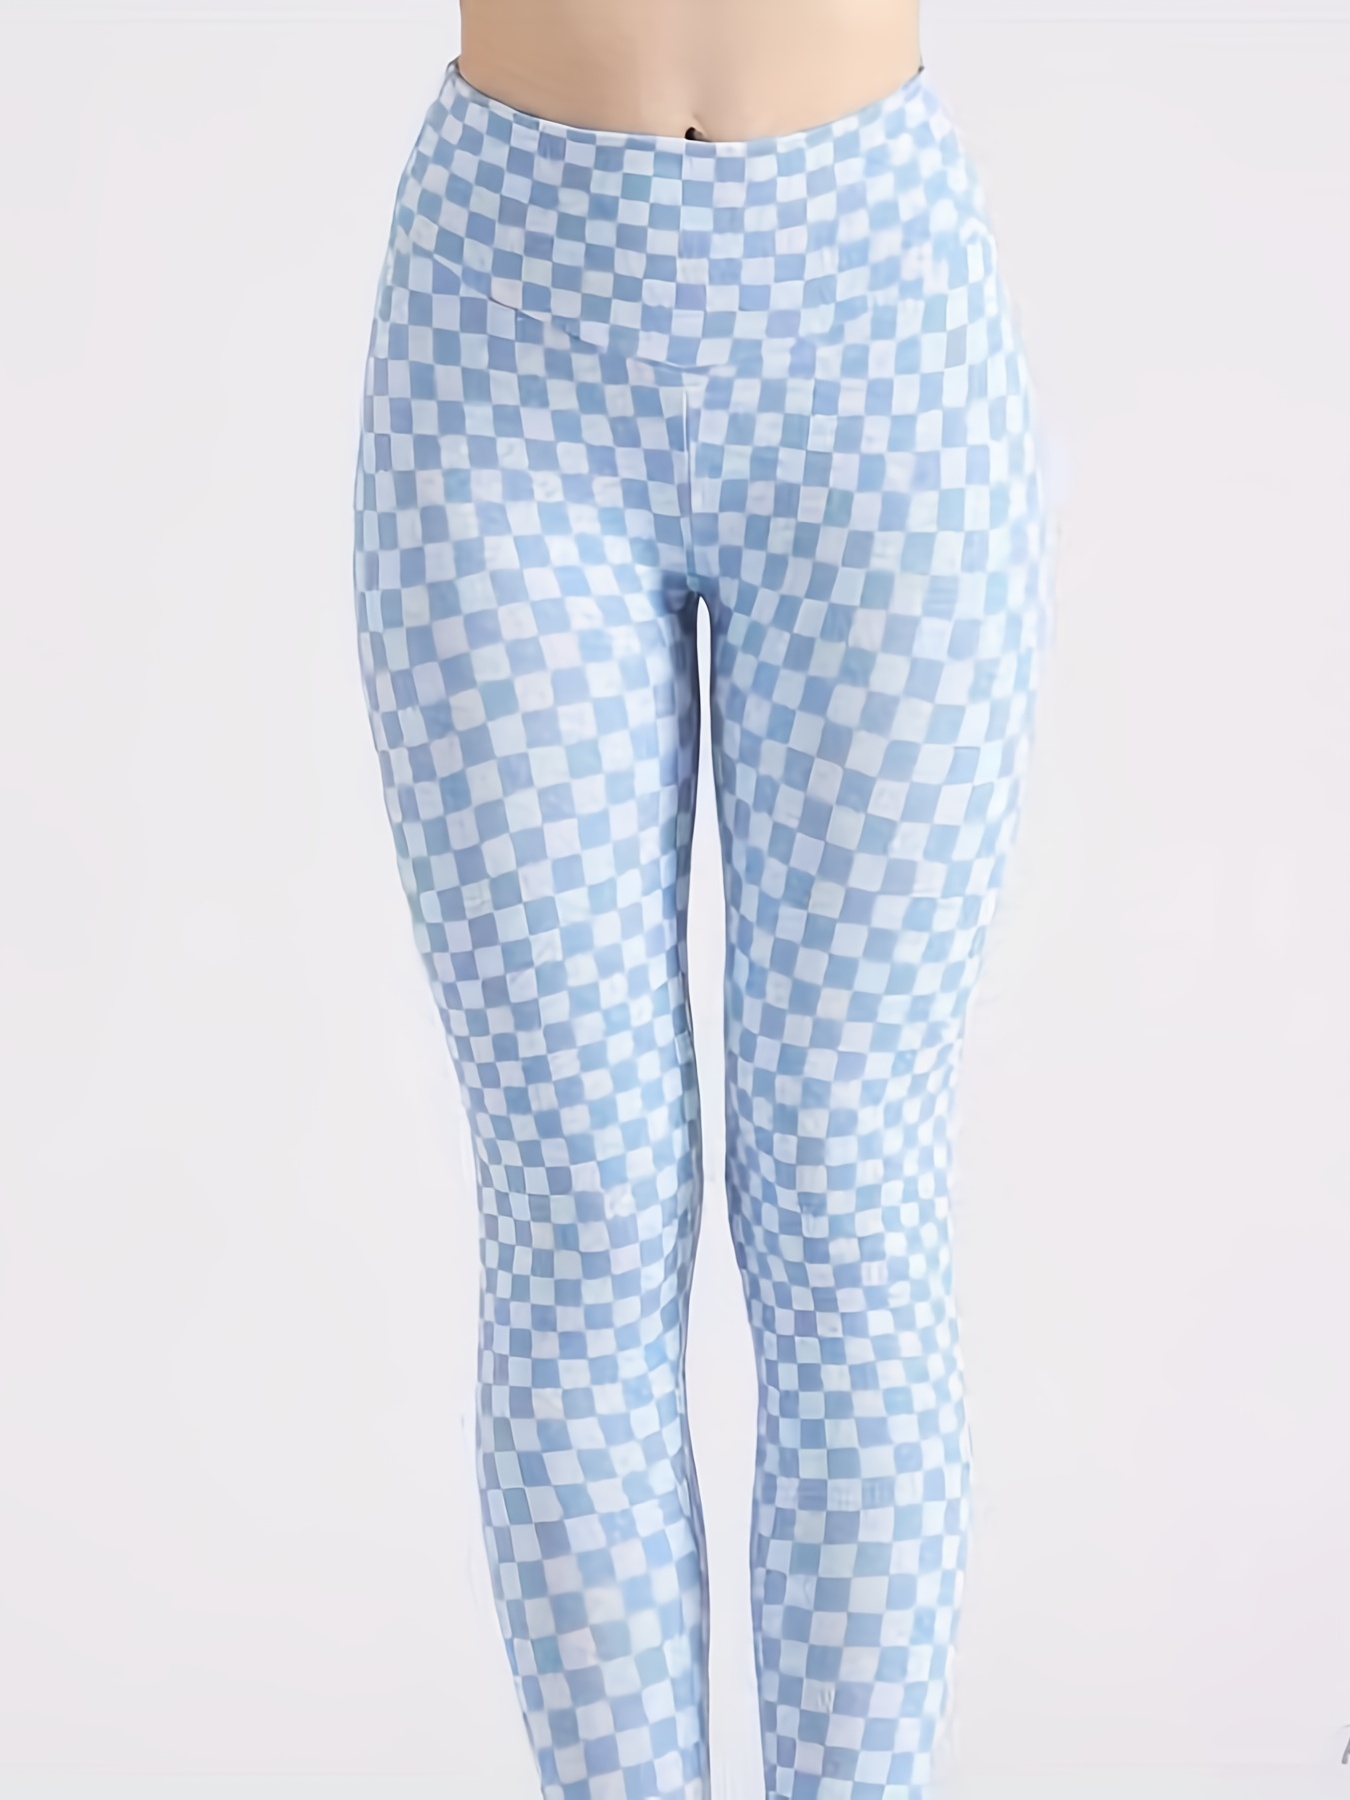 Ideology leggings light blue with white speckles. – Gesina Plus Size Clothes